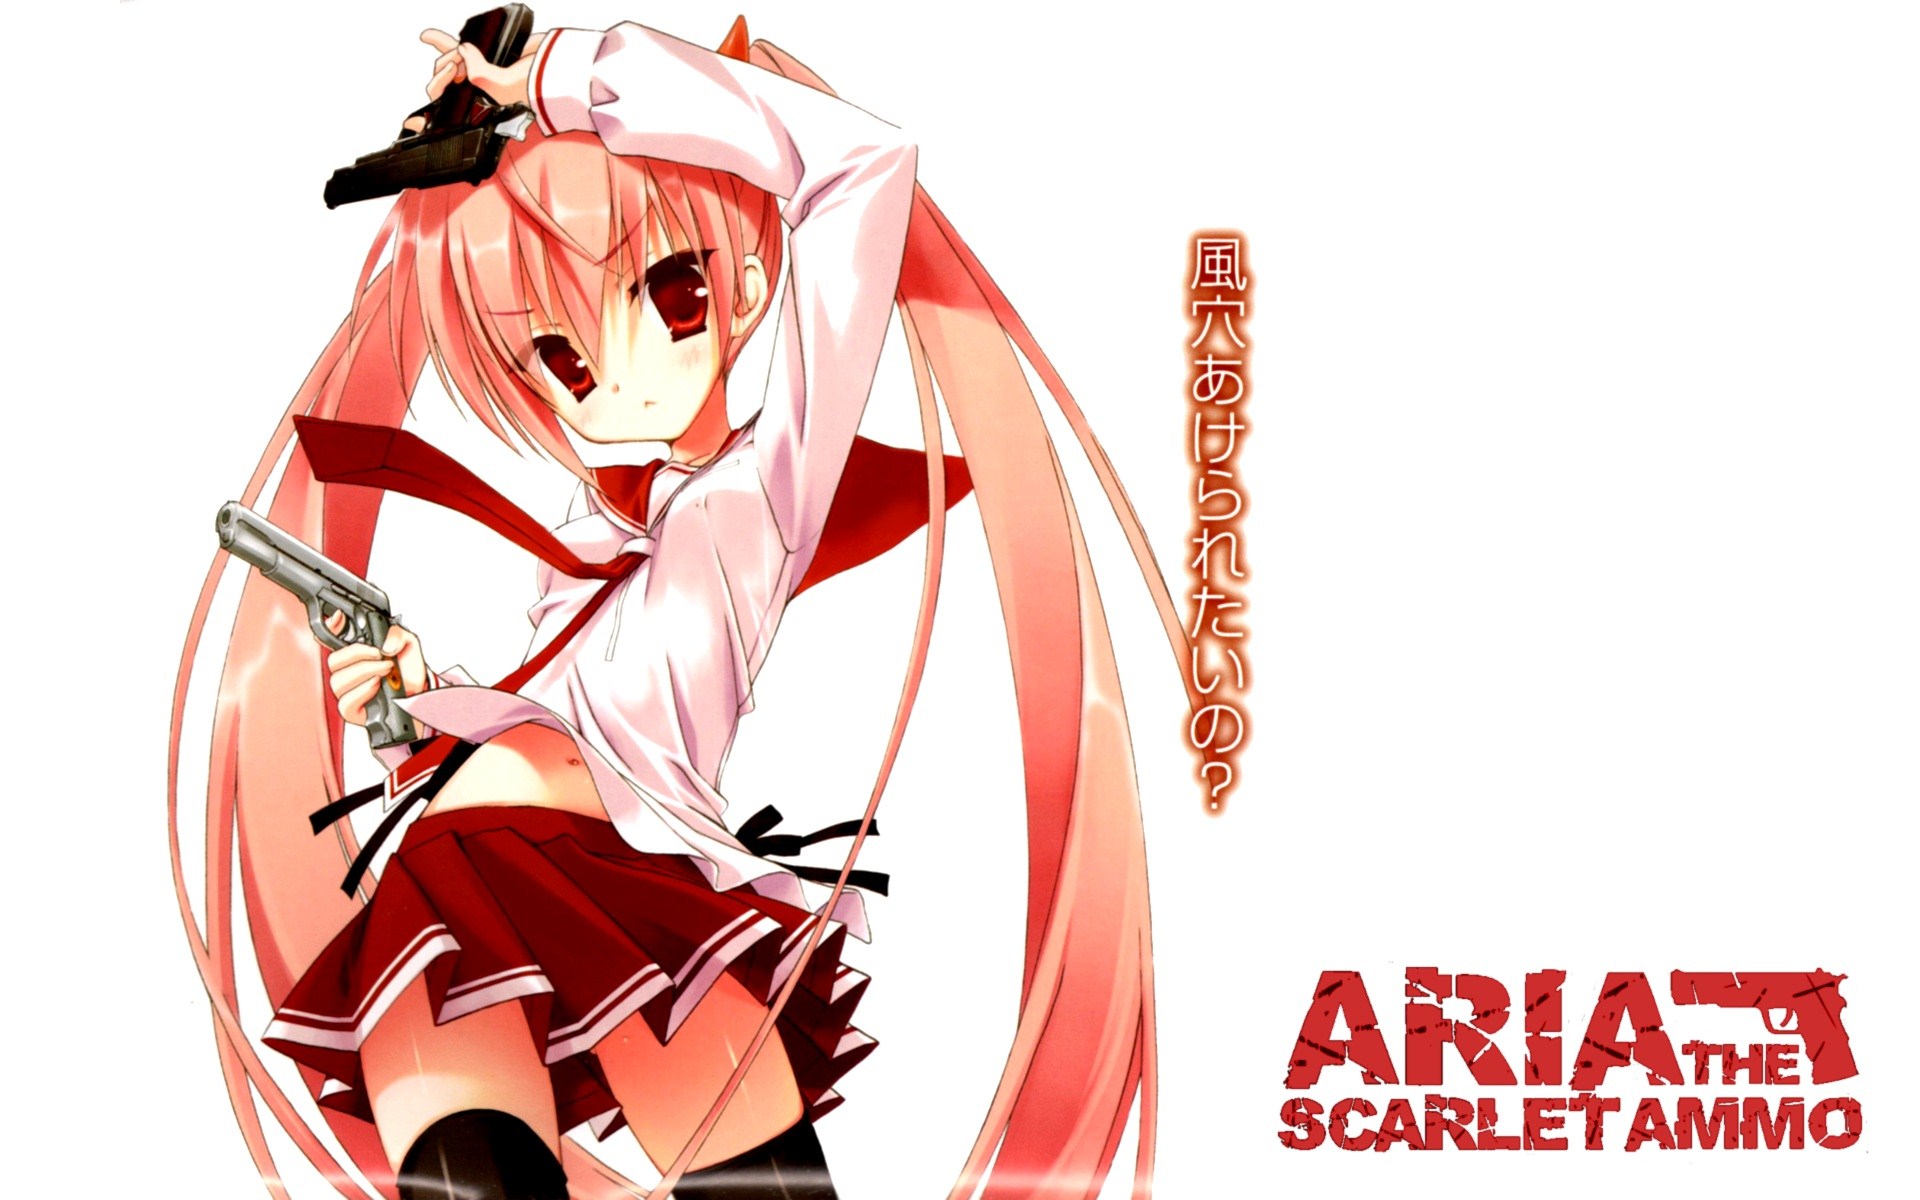 Aria The Scarlet Ammo Backgrounds, Compatible - PC, Mobile, Gadgets| 1920x1200 px